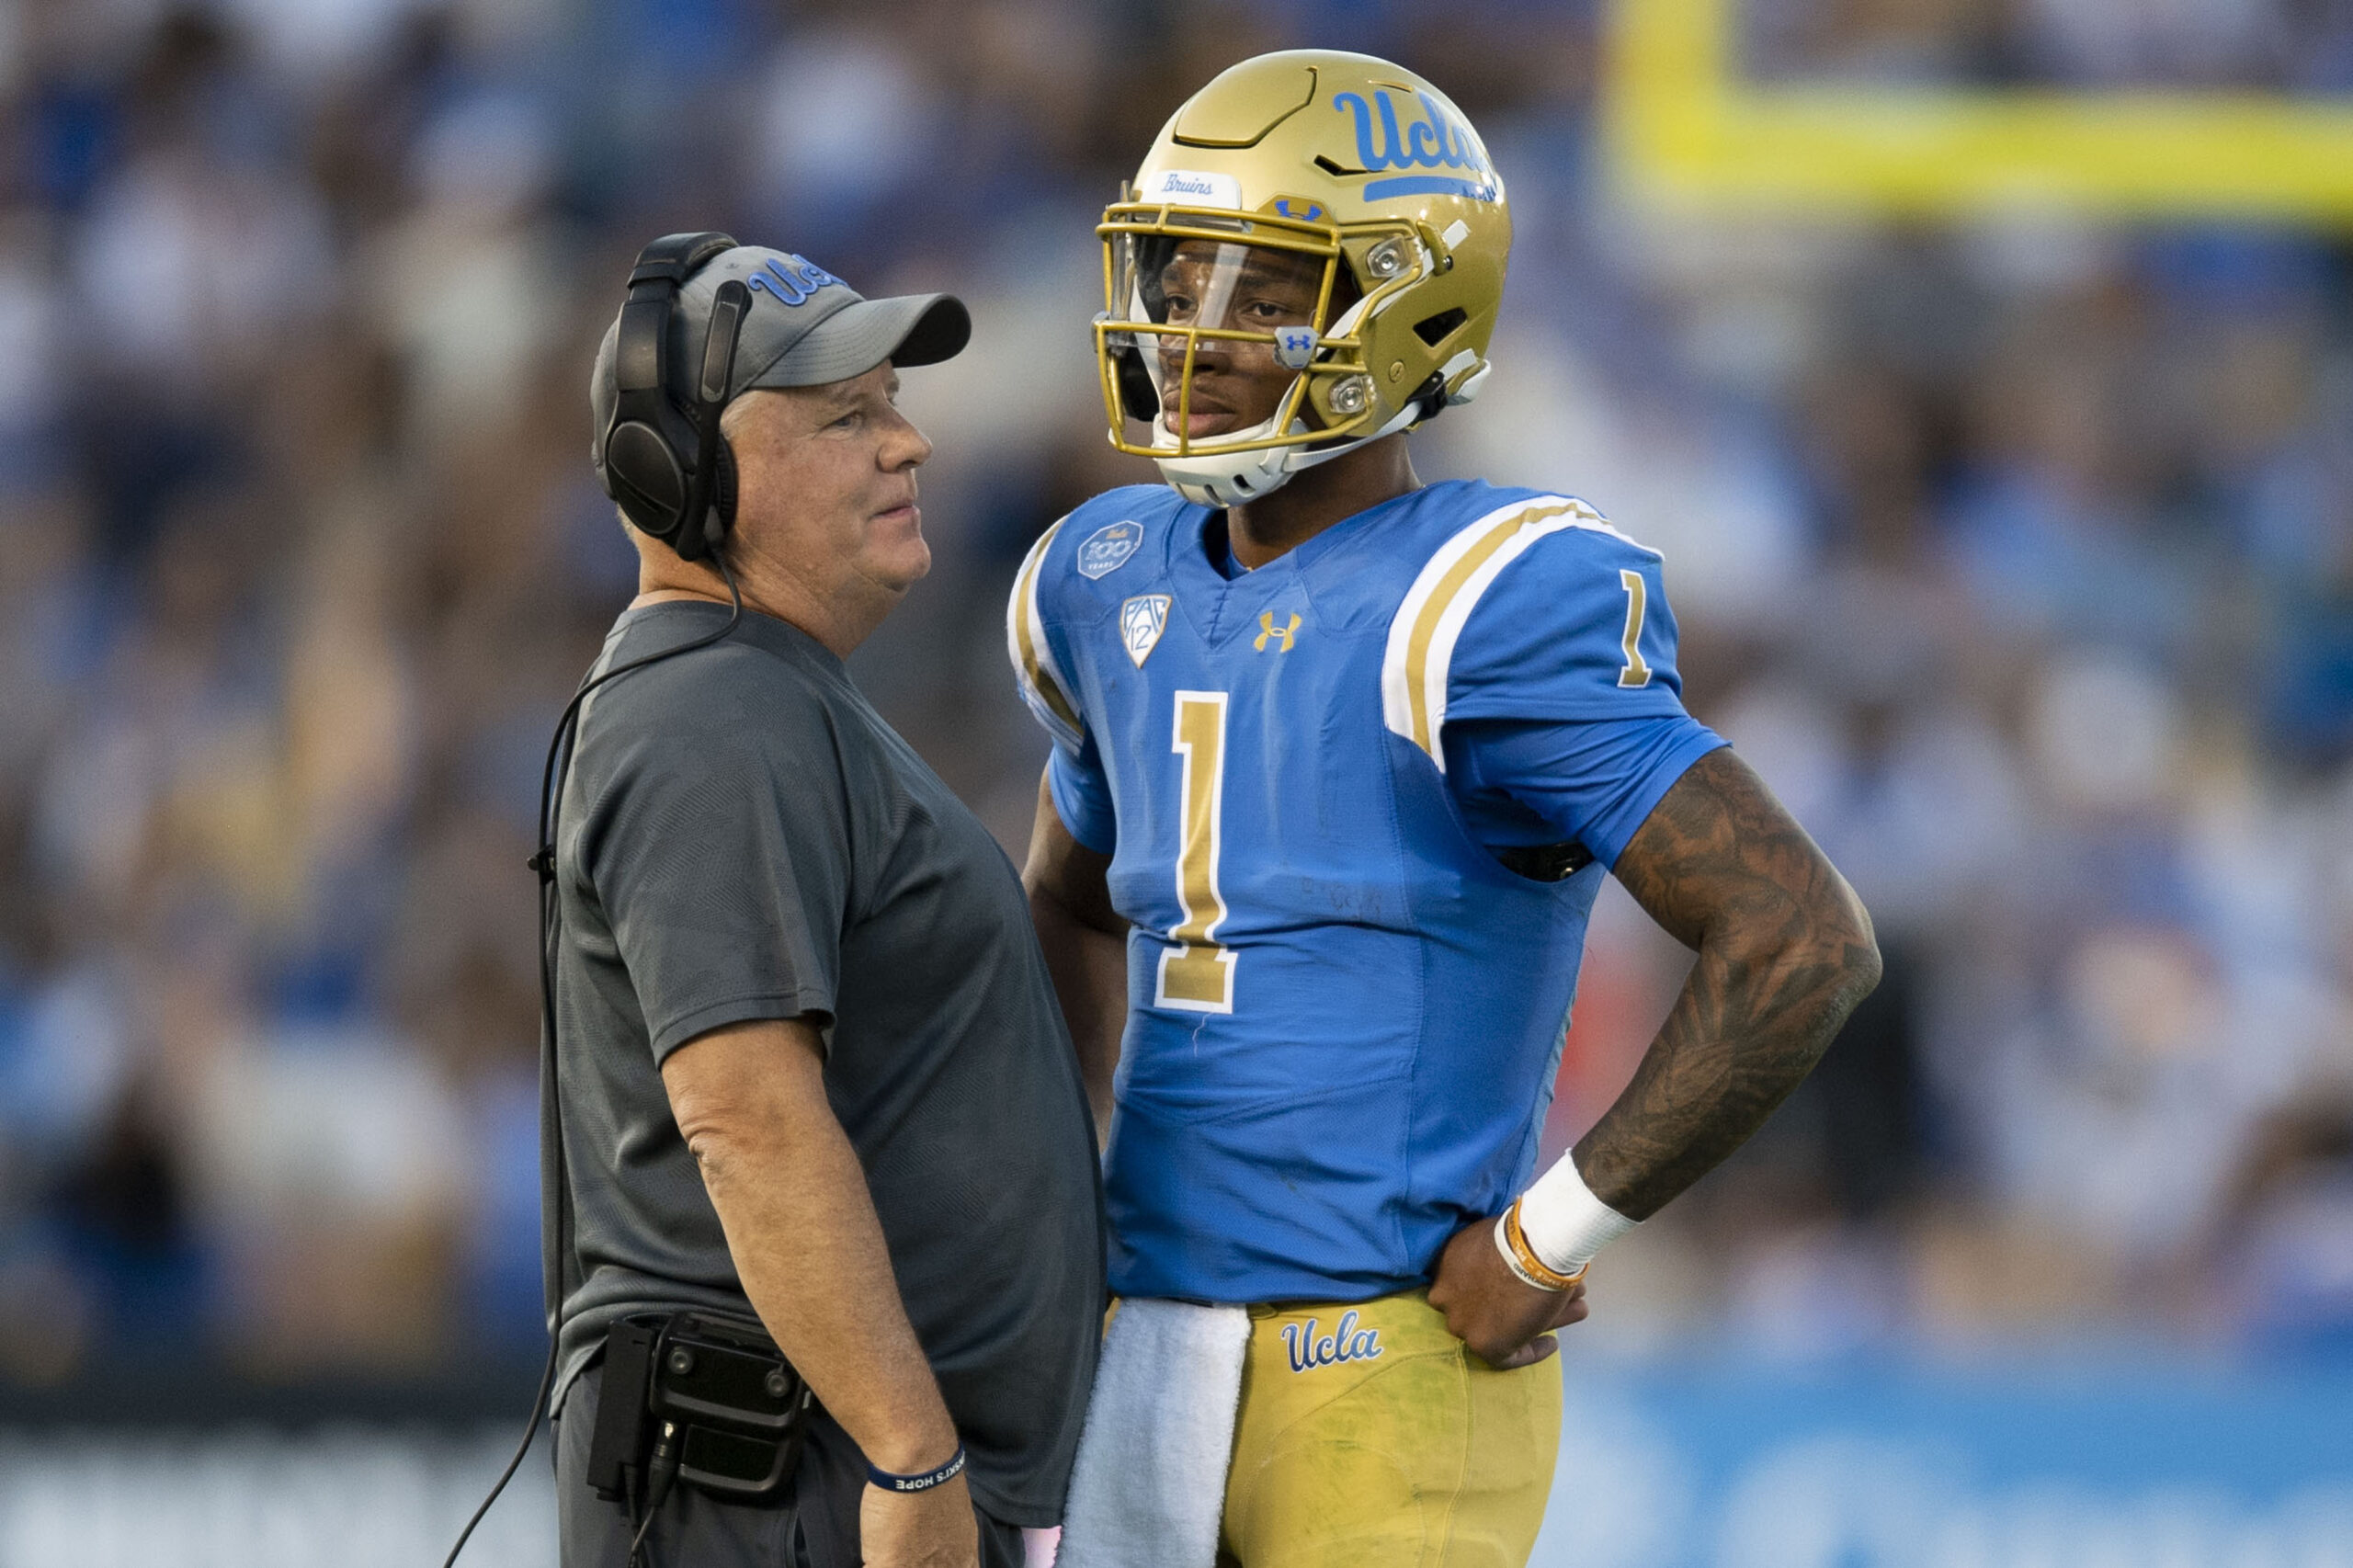 The Bull on College Pigskin: UCLA Opens Shortened 2020 Season in the ‘Mile High City’